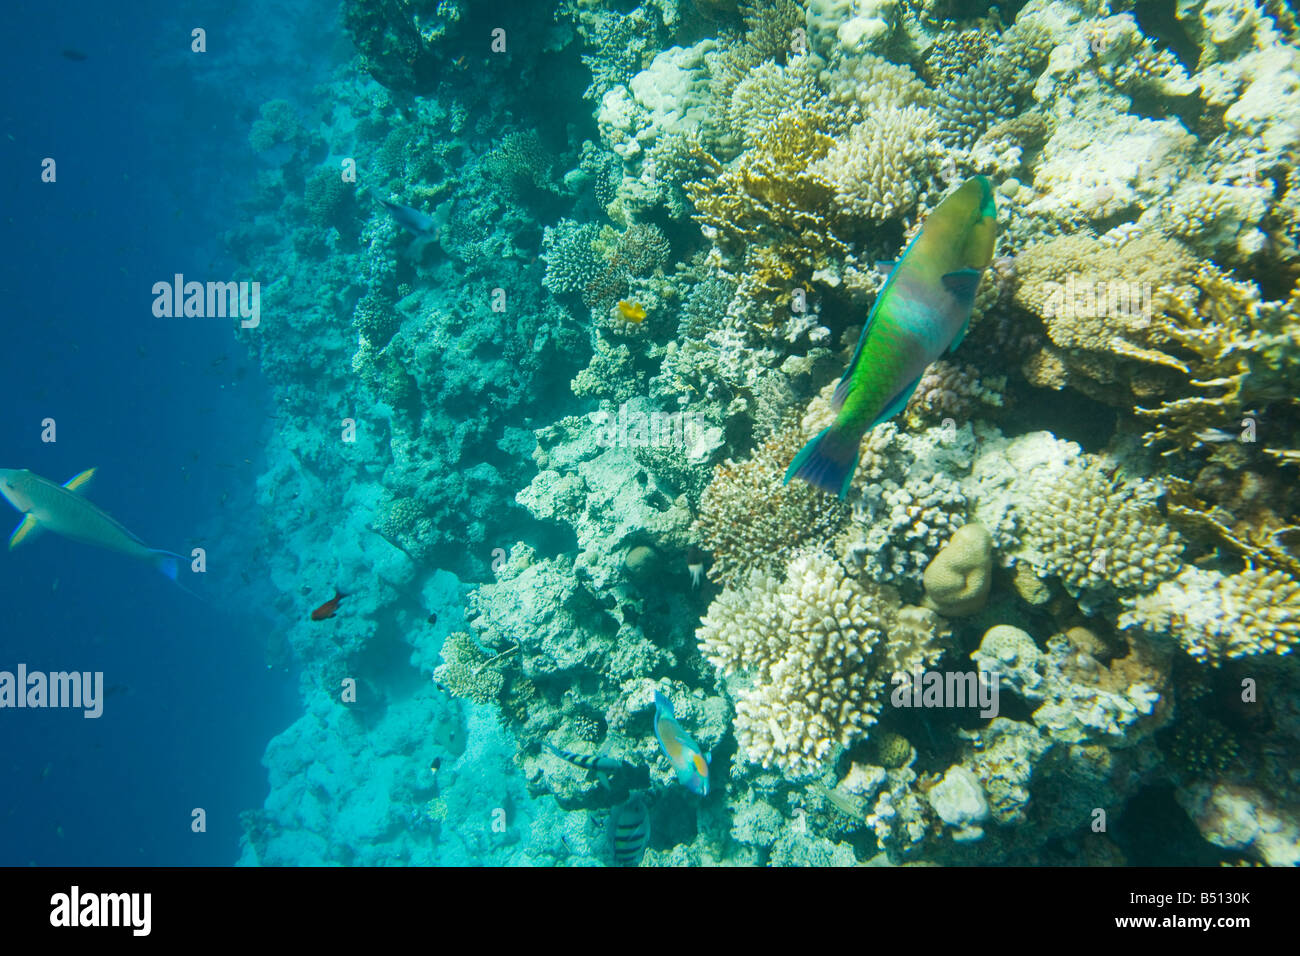 Coral reef in the Blue Hole off Dahab in the Red Sea in Egypt Stock ...